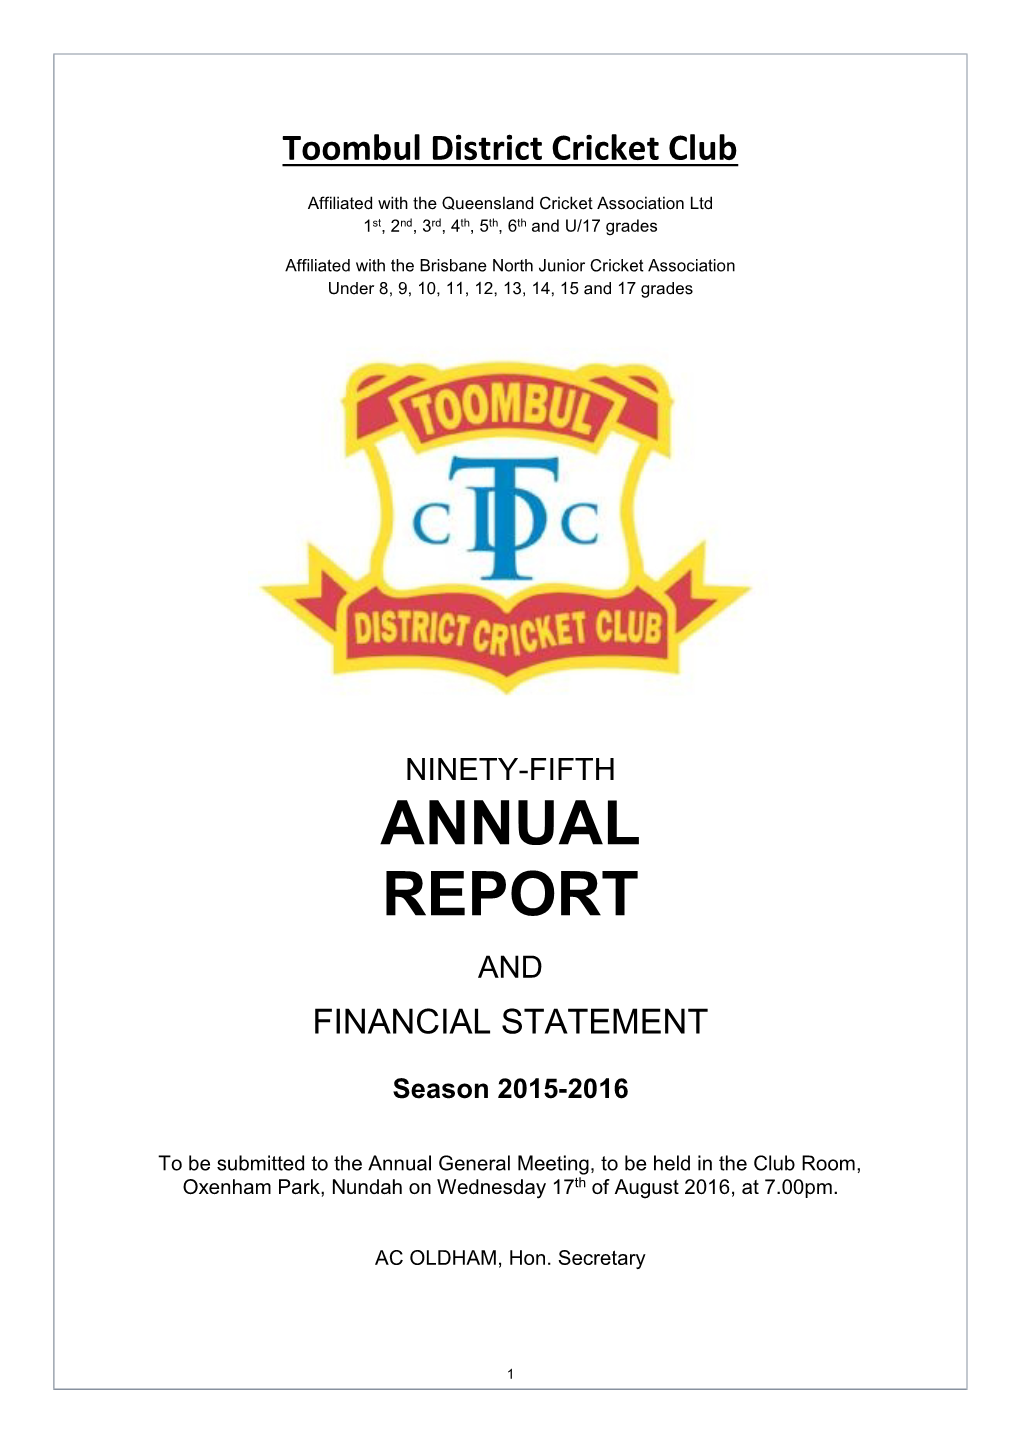 Annual Report and Financial Statement